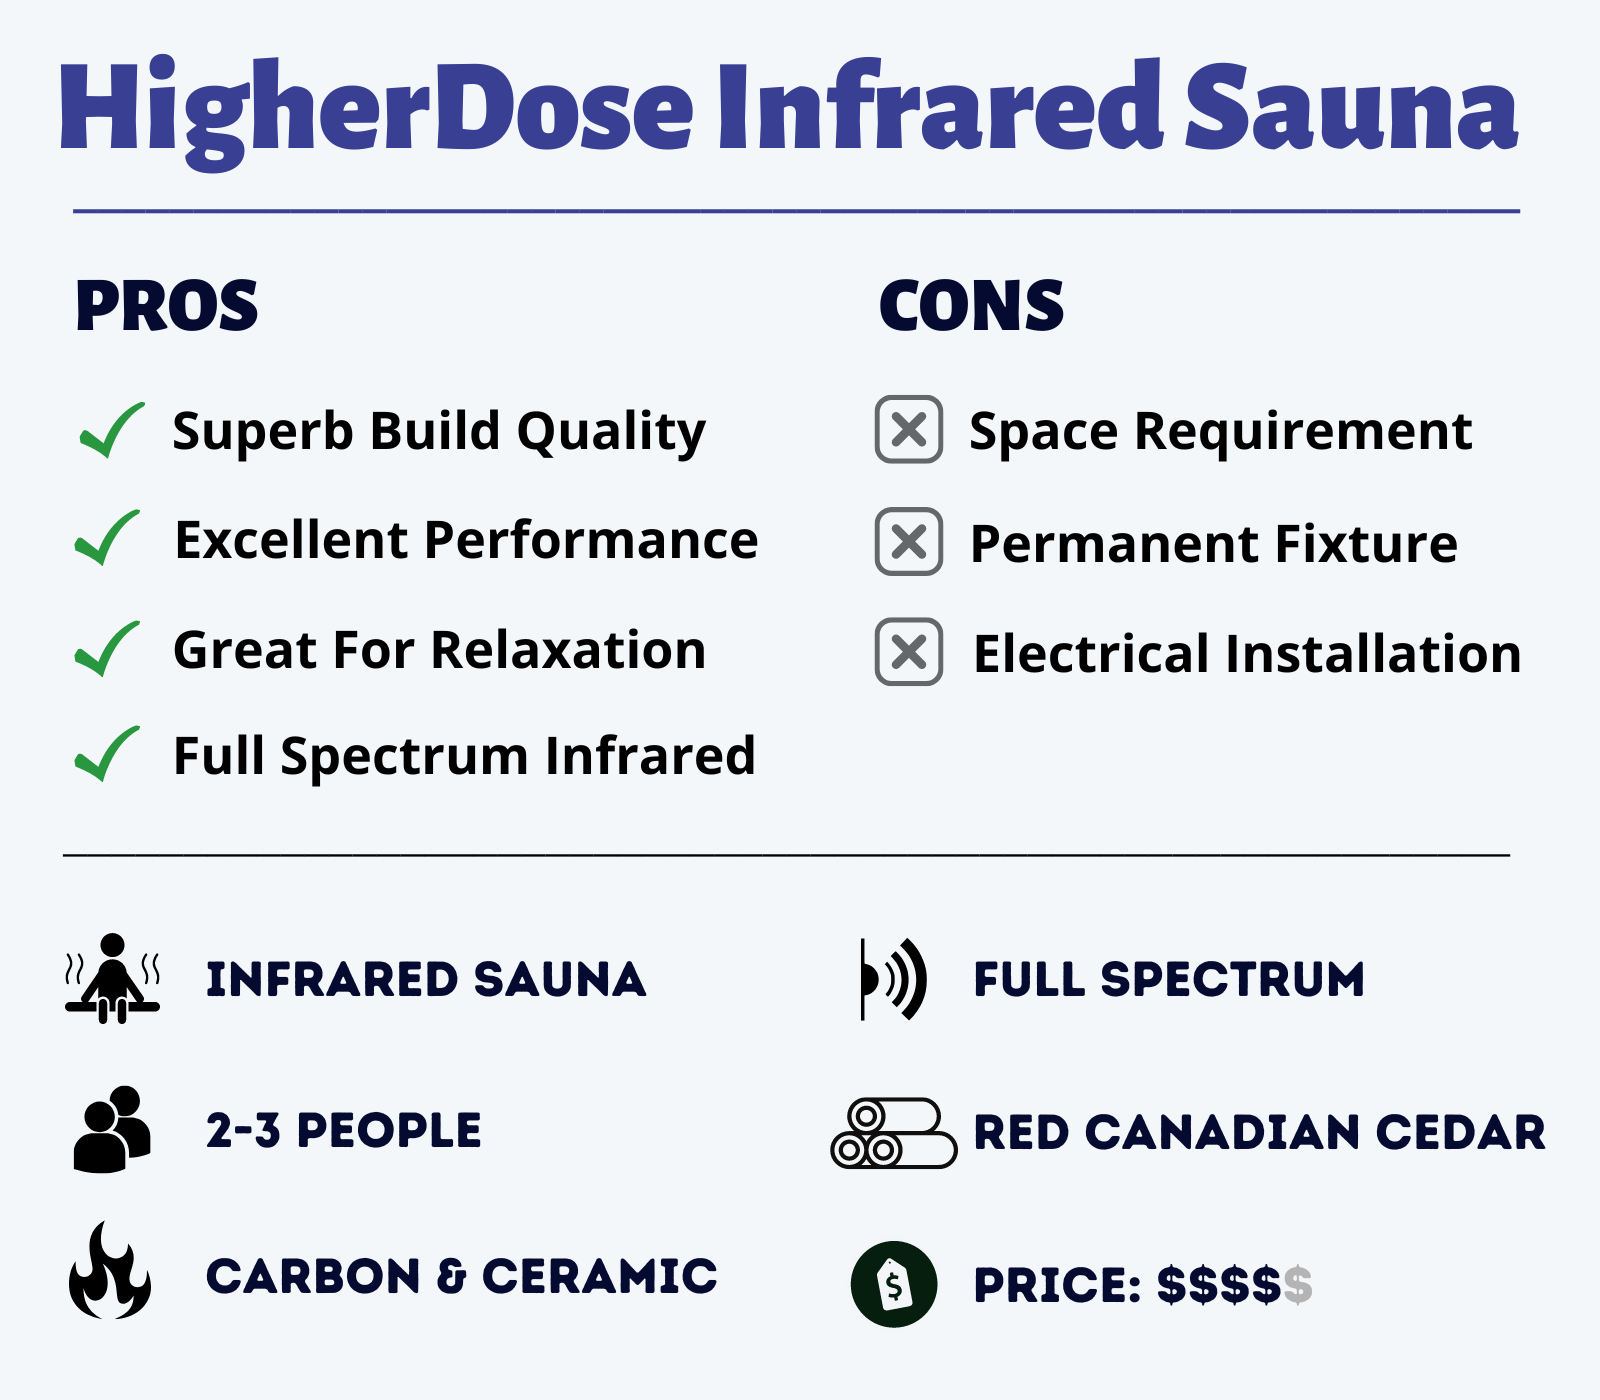 Key features of the higher dose infrared sauna